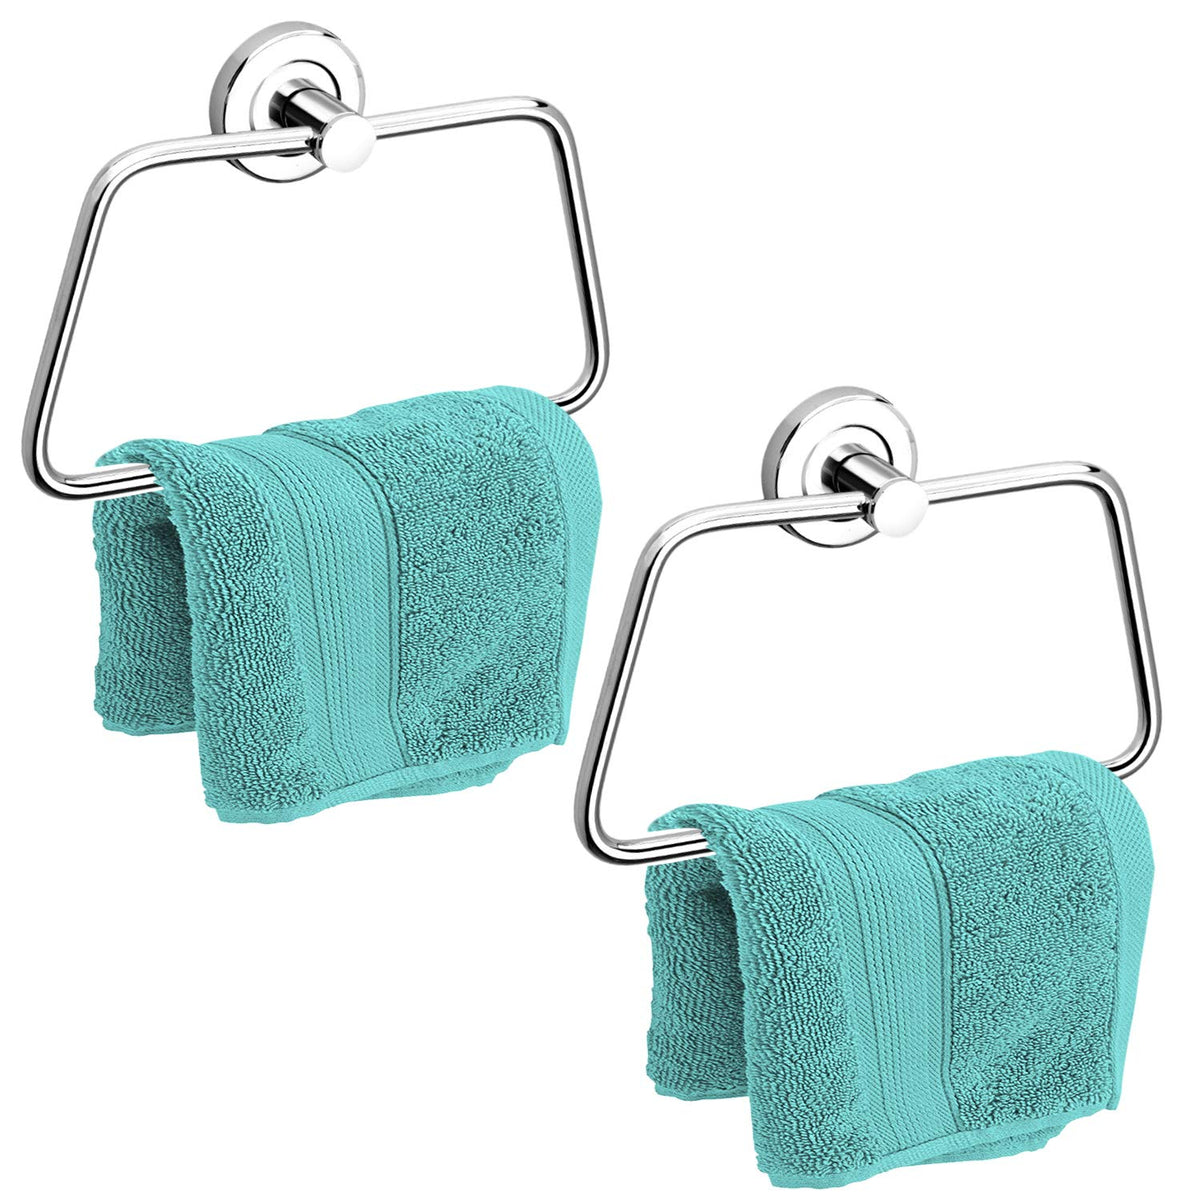 Plantex Stainless Steel Towel Ring for Bathroom/Wash Basin/Napkin-Towel Hanger/Bathroom Accessories (Chrome-Rectangle) - Pack of 3